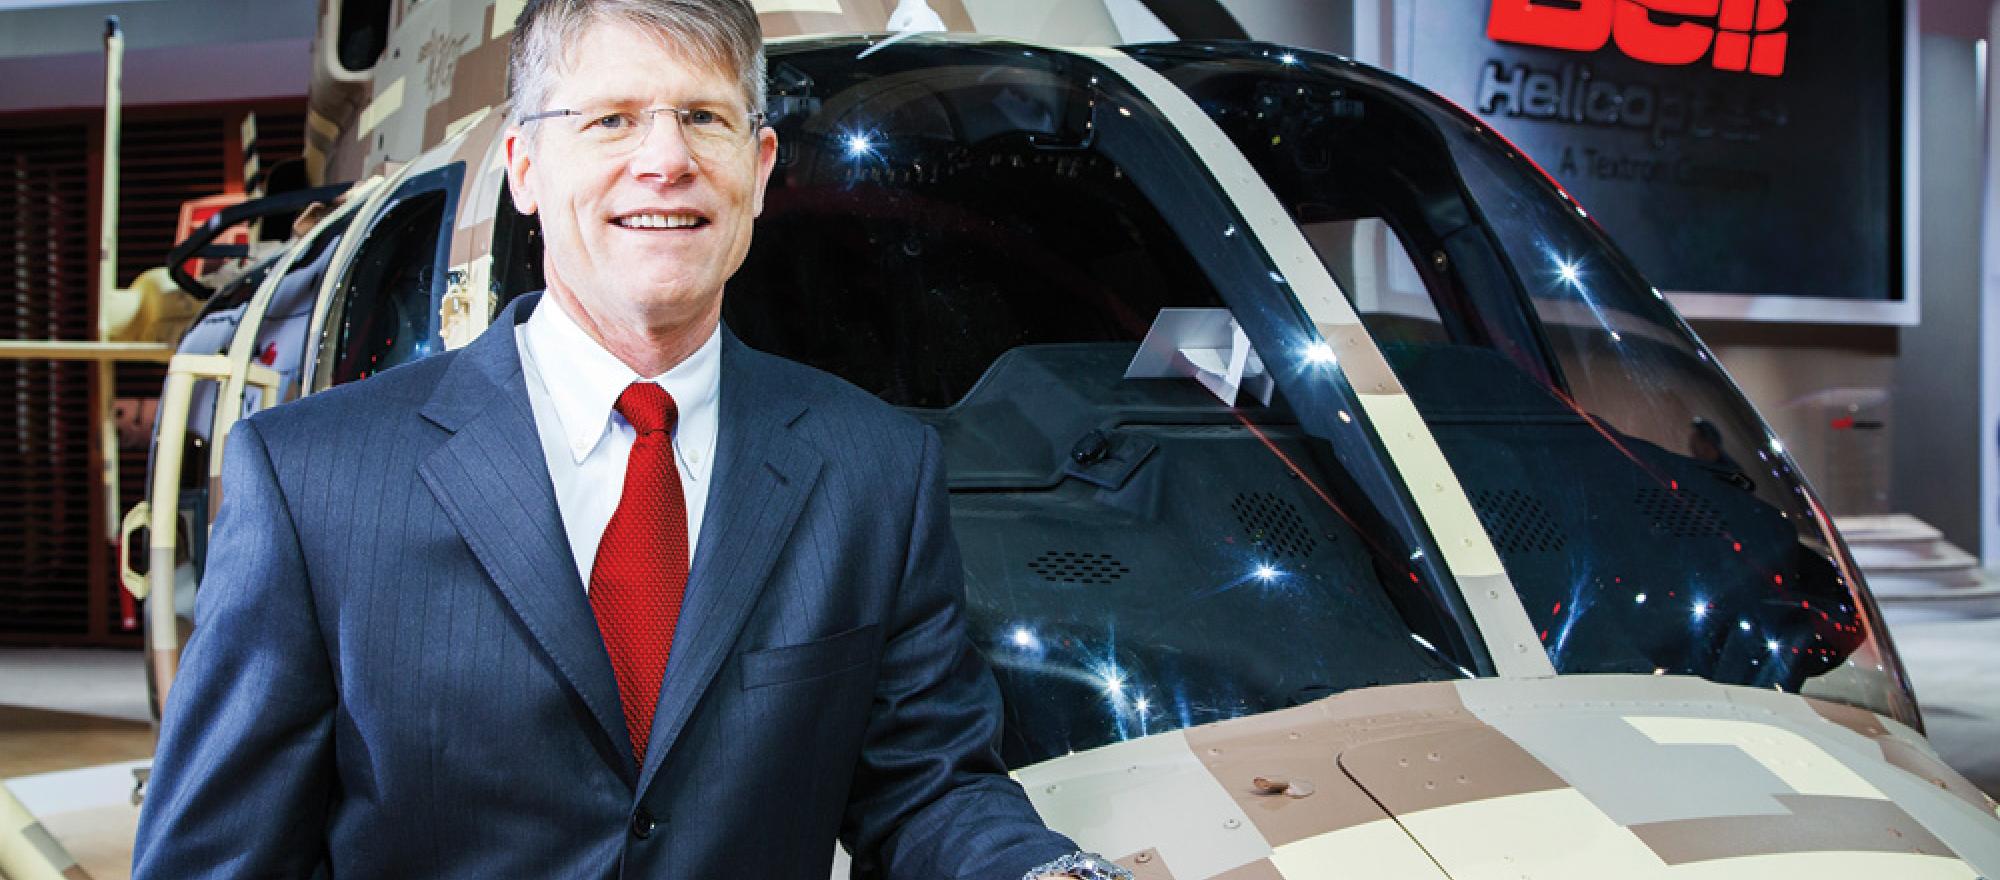 Bell Helicopter President and CEO, John L. Garrison, Jr. (Photo: Bell Helicopter)